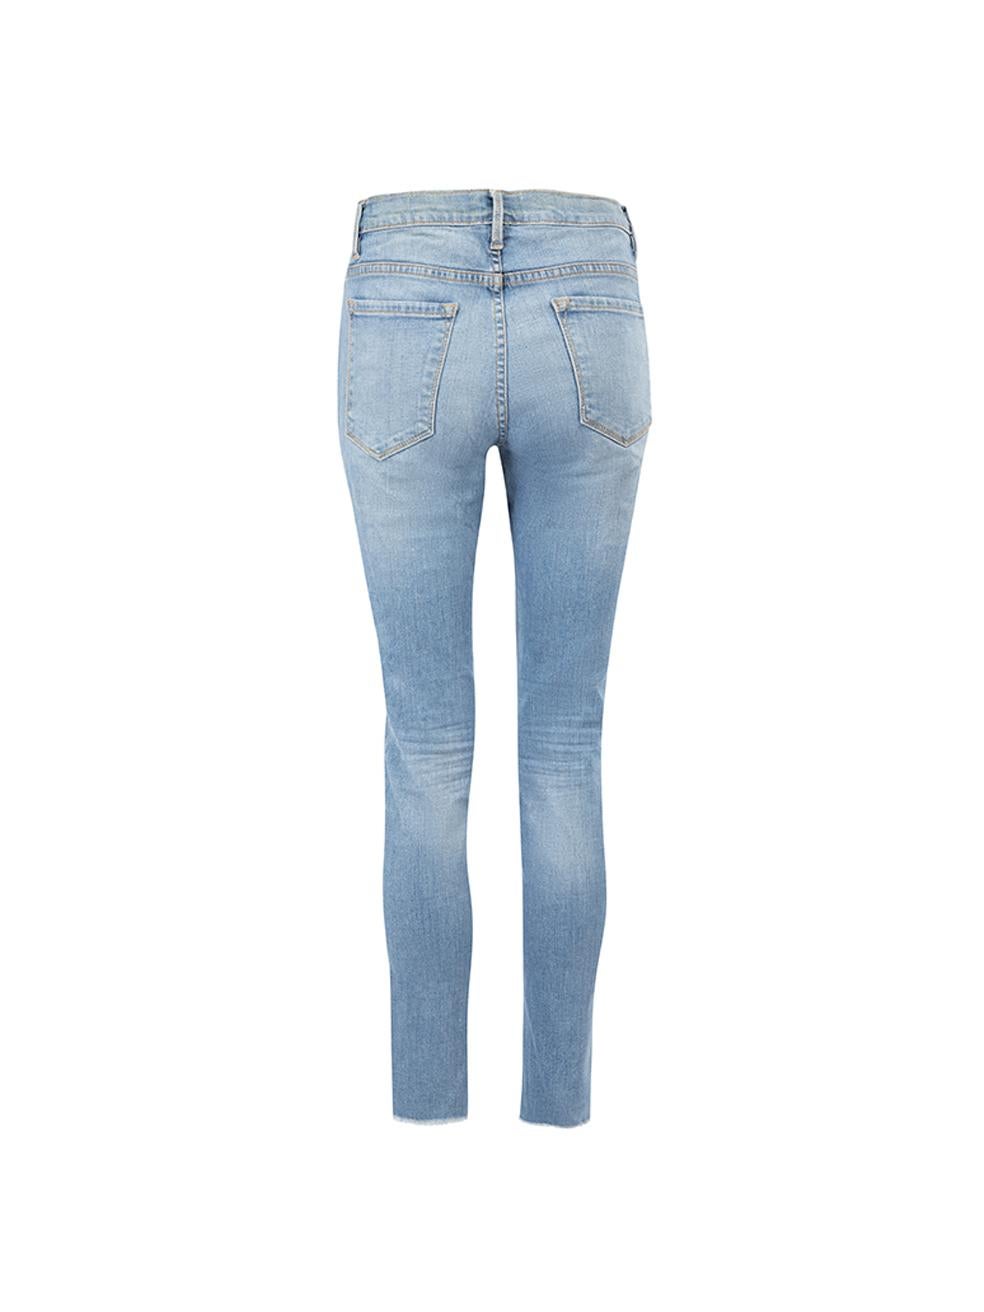 Pre-Loved FRAME Women's Blue Le Skinny de Jeanne Crop Jeans In Excellent Condition For Sale In London, GB